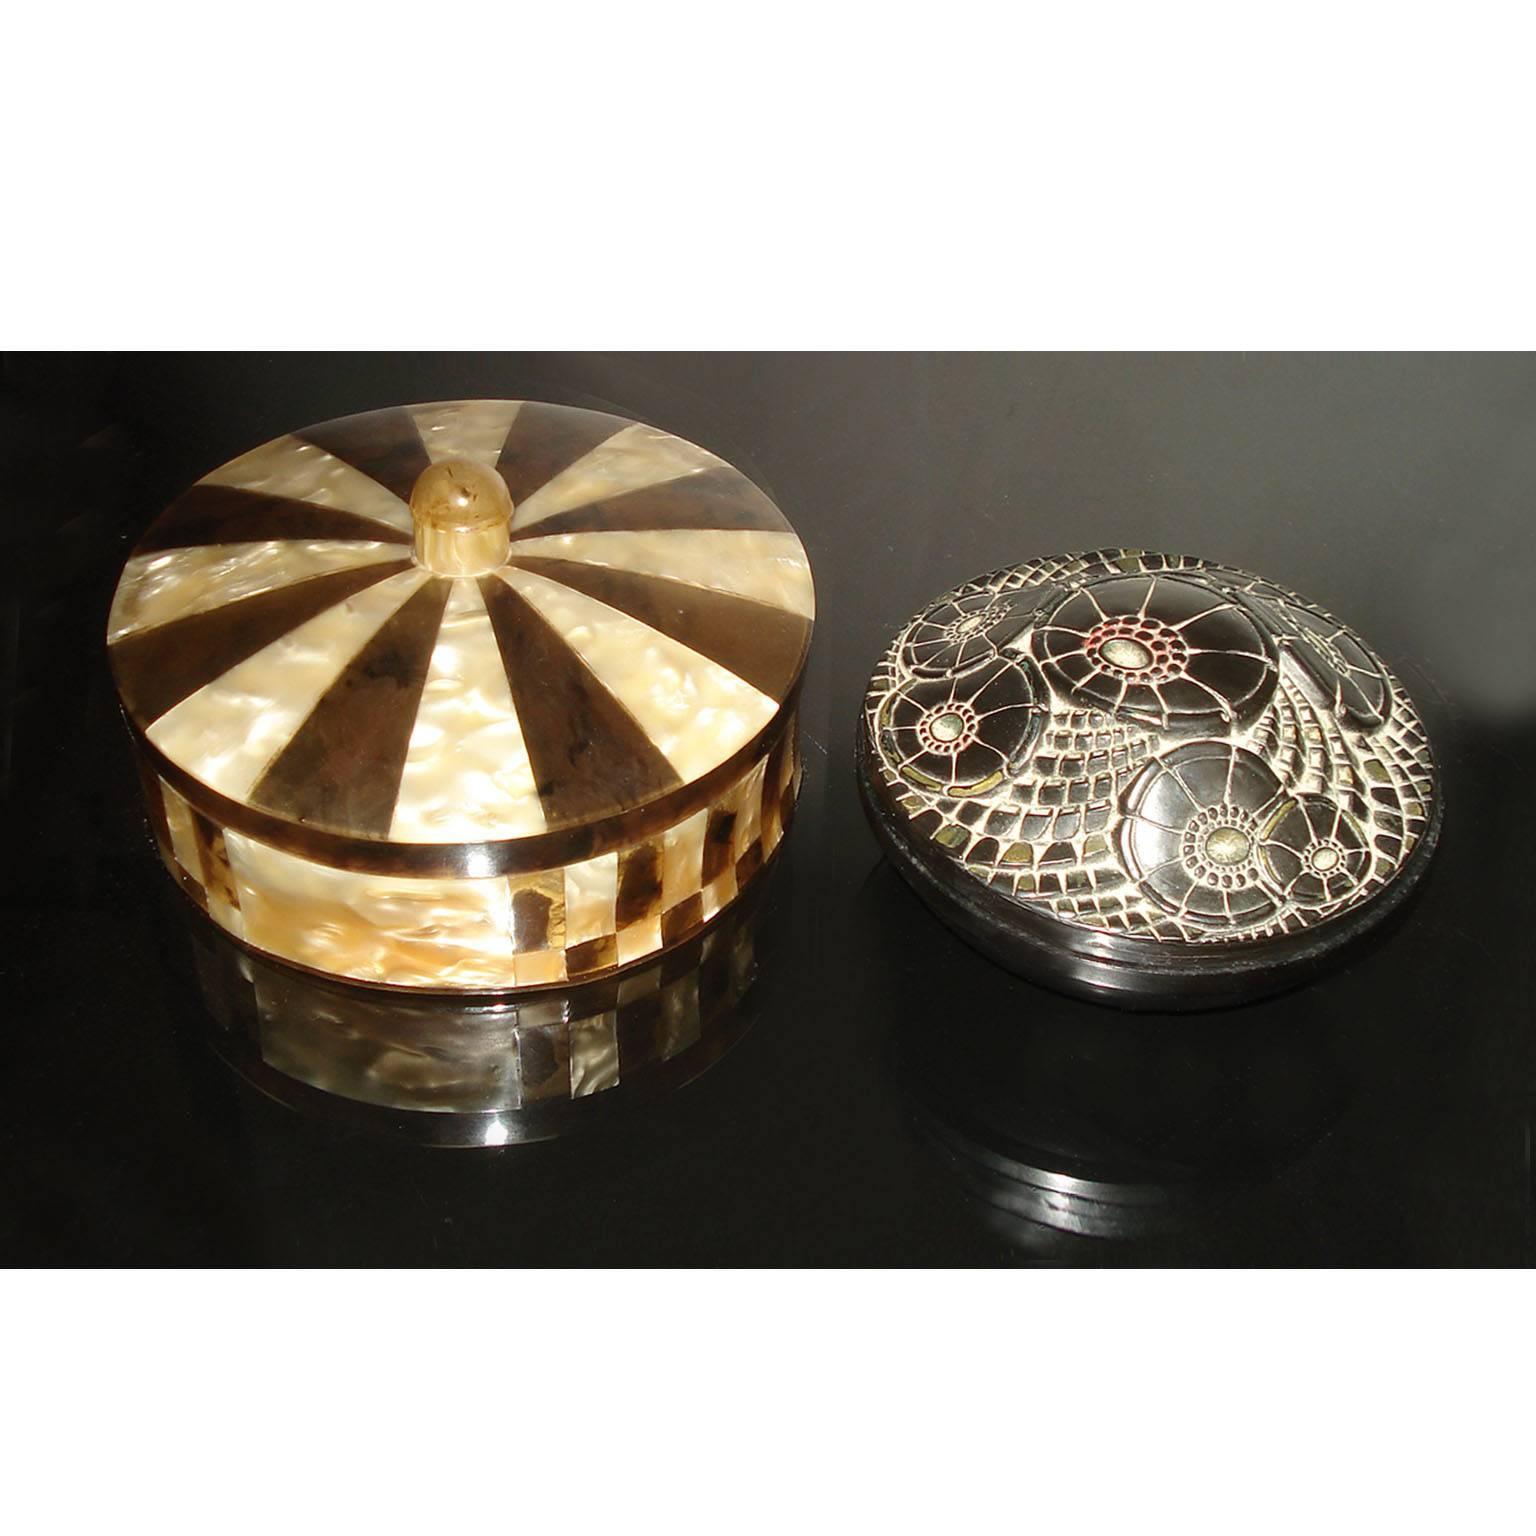 Very decorative Art Deco box with cover, checkered pattern of faux mother of pearl and faux tortoise shell panels, on the side, lid with star decor.
Made of Cellulose Acetate (is a natural plastic, which is manufactured from purified natural